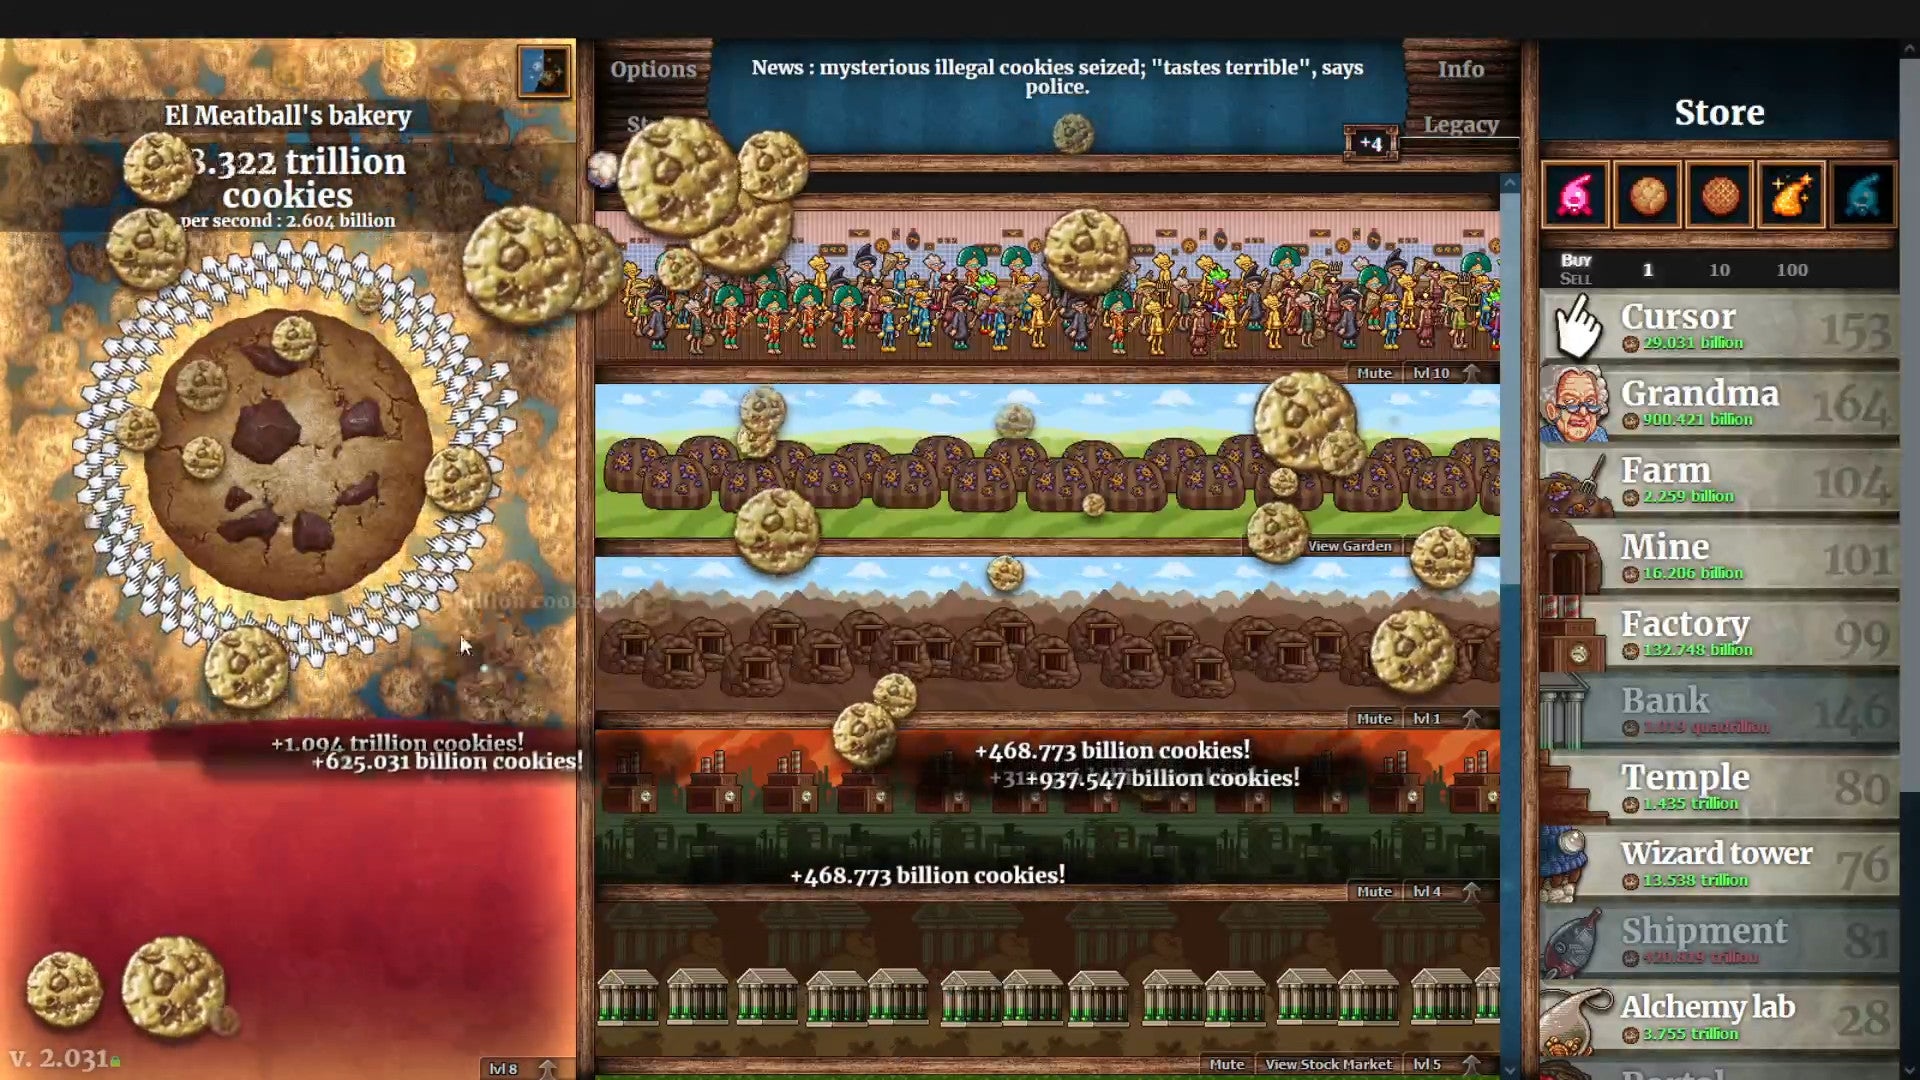 Cookie Clicker - El Meatball's bakery generating 3.322 trillion cookies per second with a sidebar of unlocked Grandmas, Farms, Factories producing cookies.